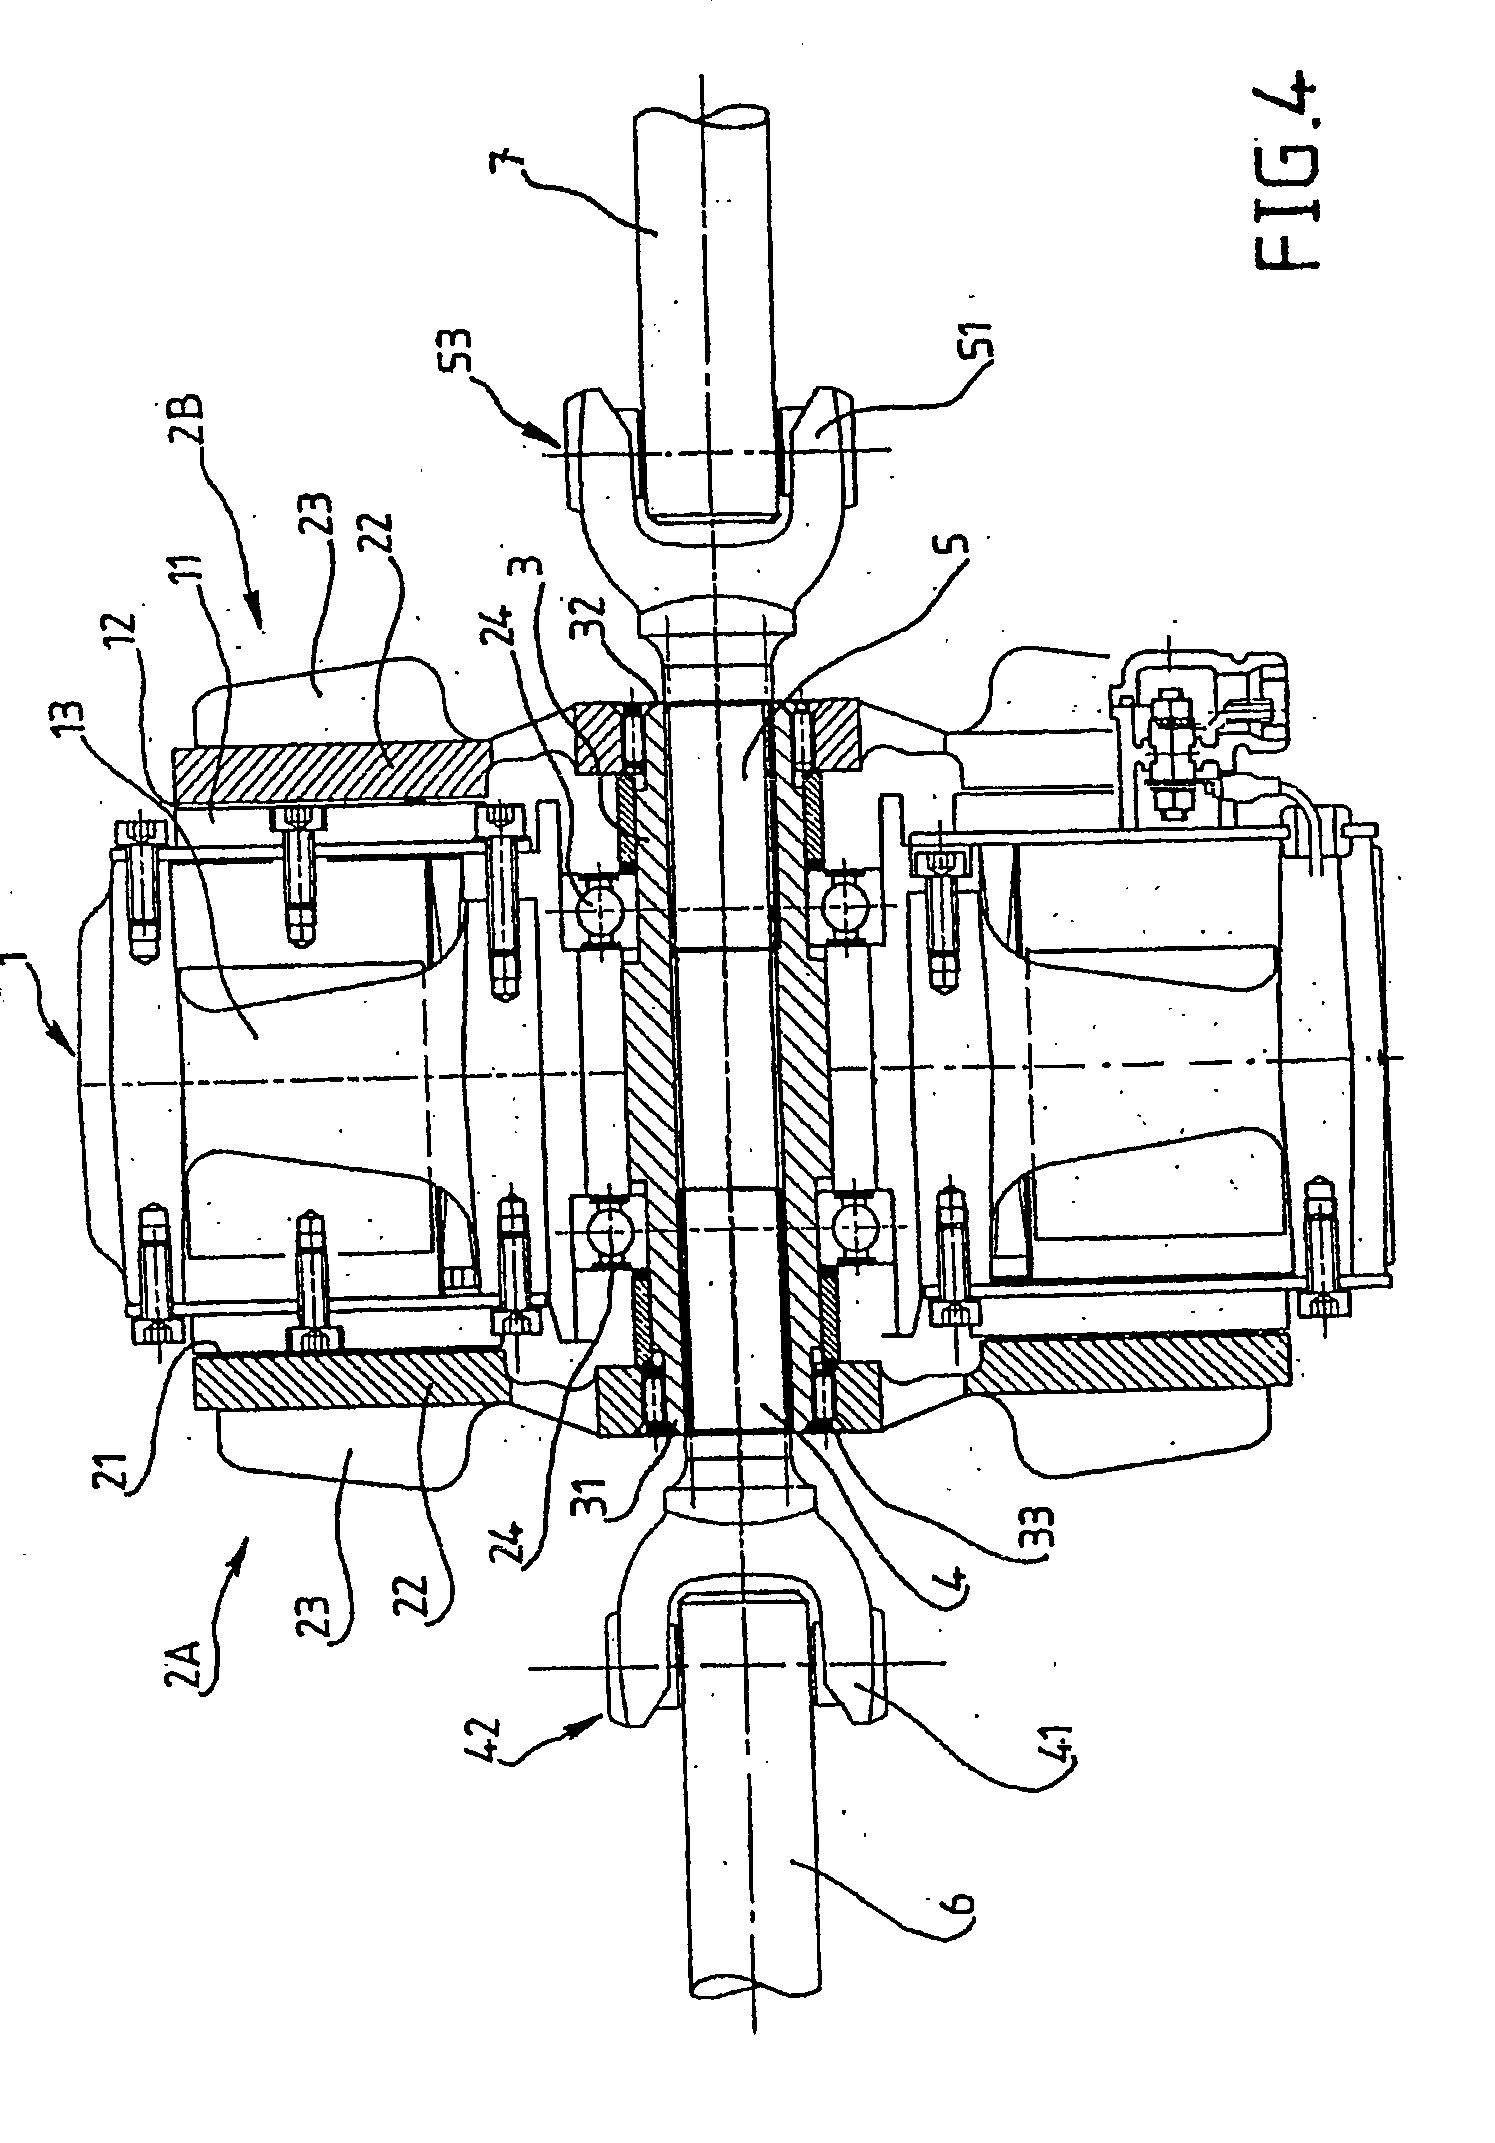 Electromagnetic Retarder For a Motor Vehicle